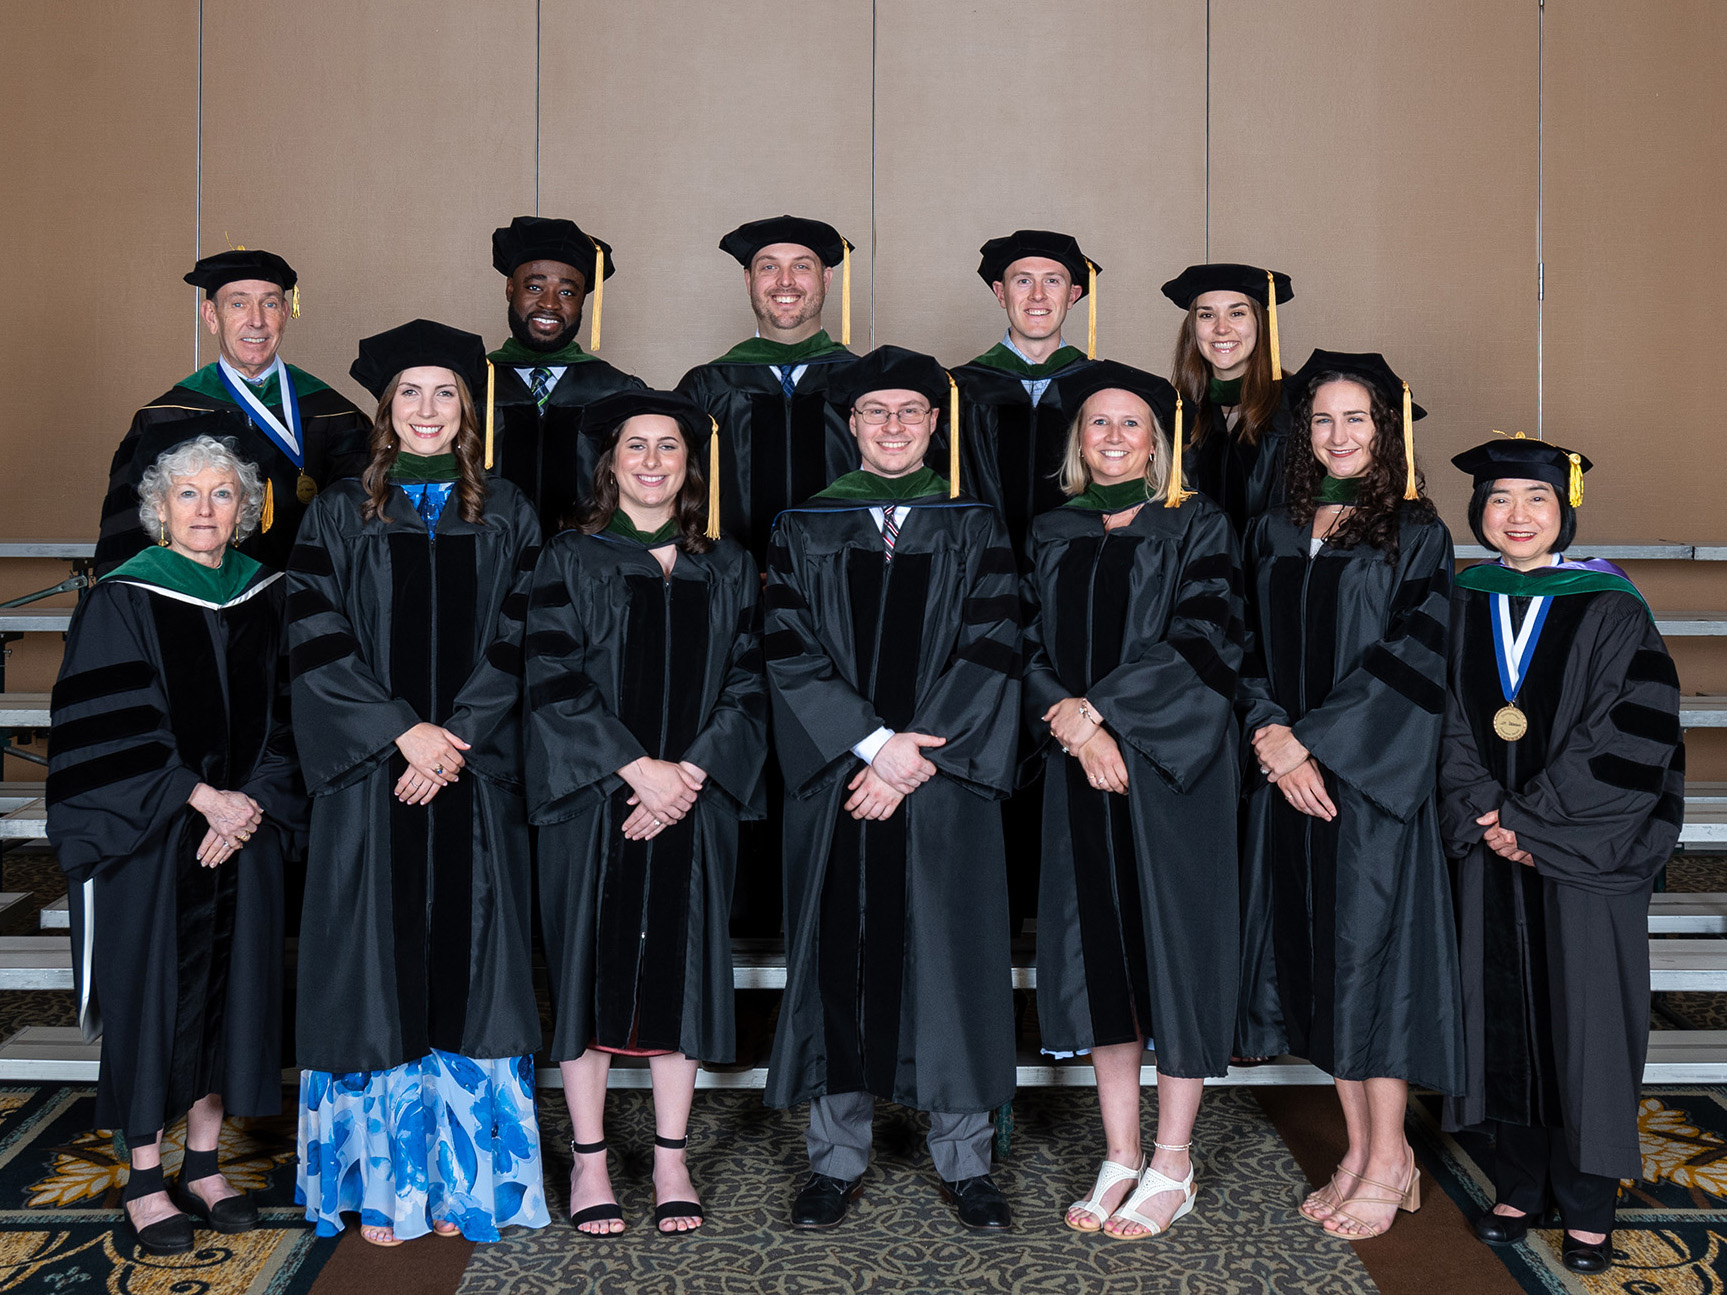 Nine graduating MD students wearing commencement robes and caps pose for a photo, flanked by two members of leadership on the left and one on the right. 